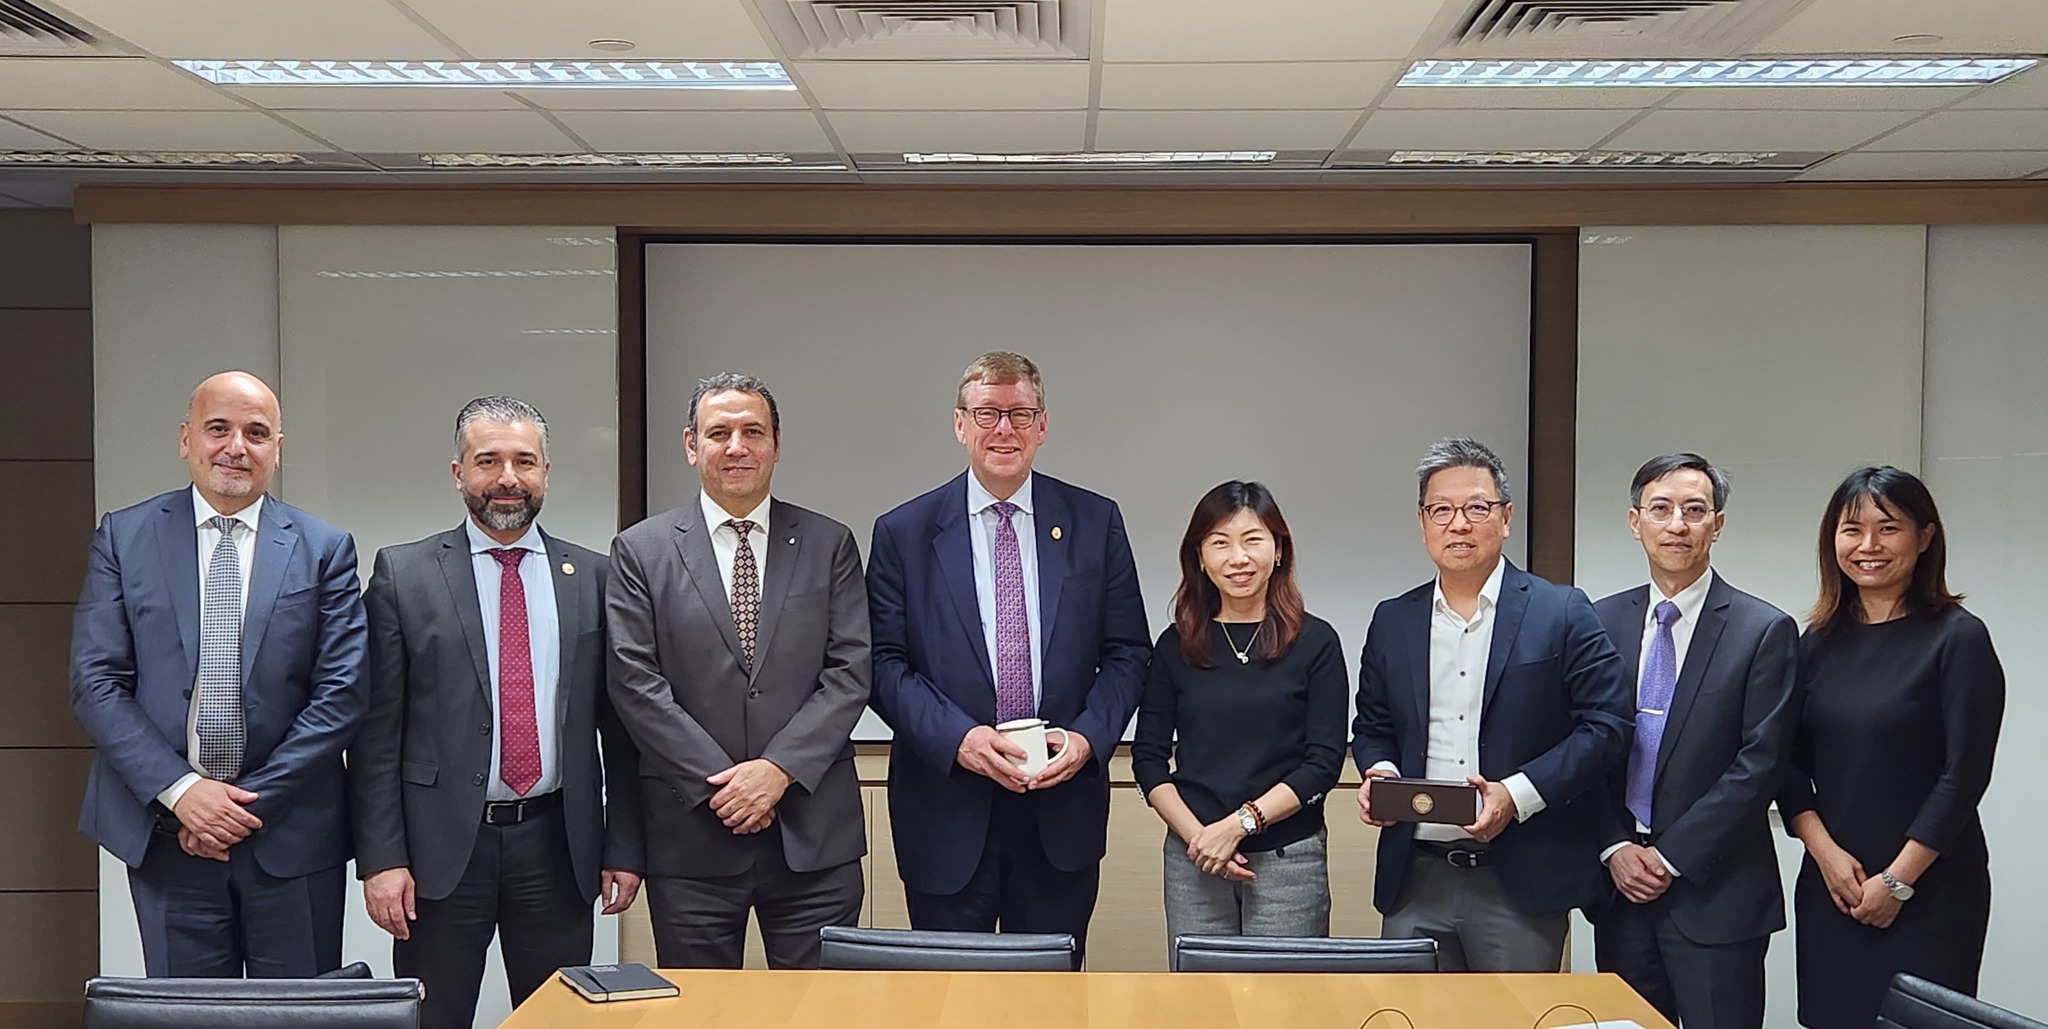 The American University of Sharjah Chancellor Dr. Tod LAURSEN (forth left) and his delegation meet with HKUST leaders including Associate Vice-President (Global Engagement & Communications) Ms. Daisy CHAN (forth right), Dean of Engineering Prof. Hong LO (third right) and Dean of Science Prof. Yung Hou WONG (second right).